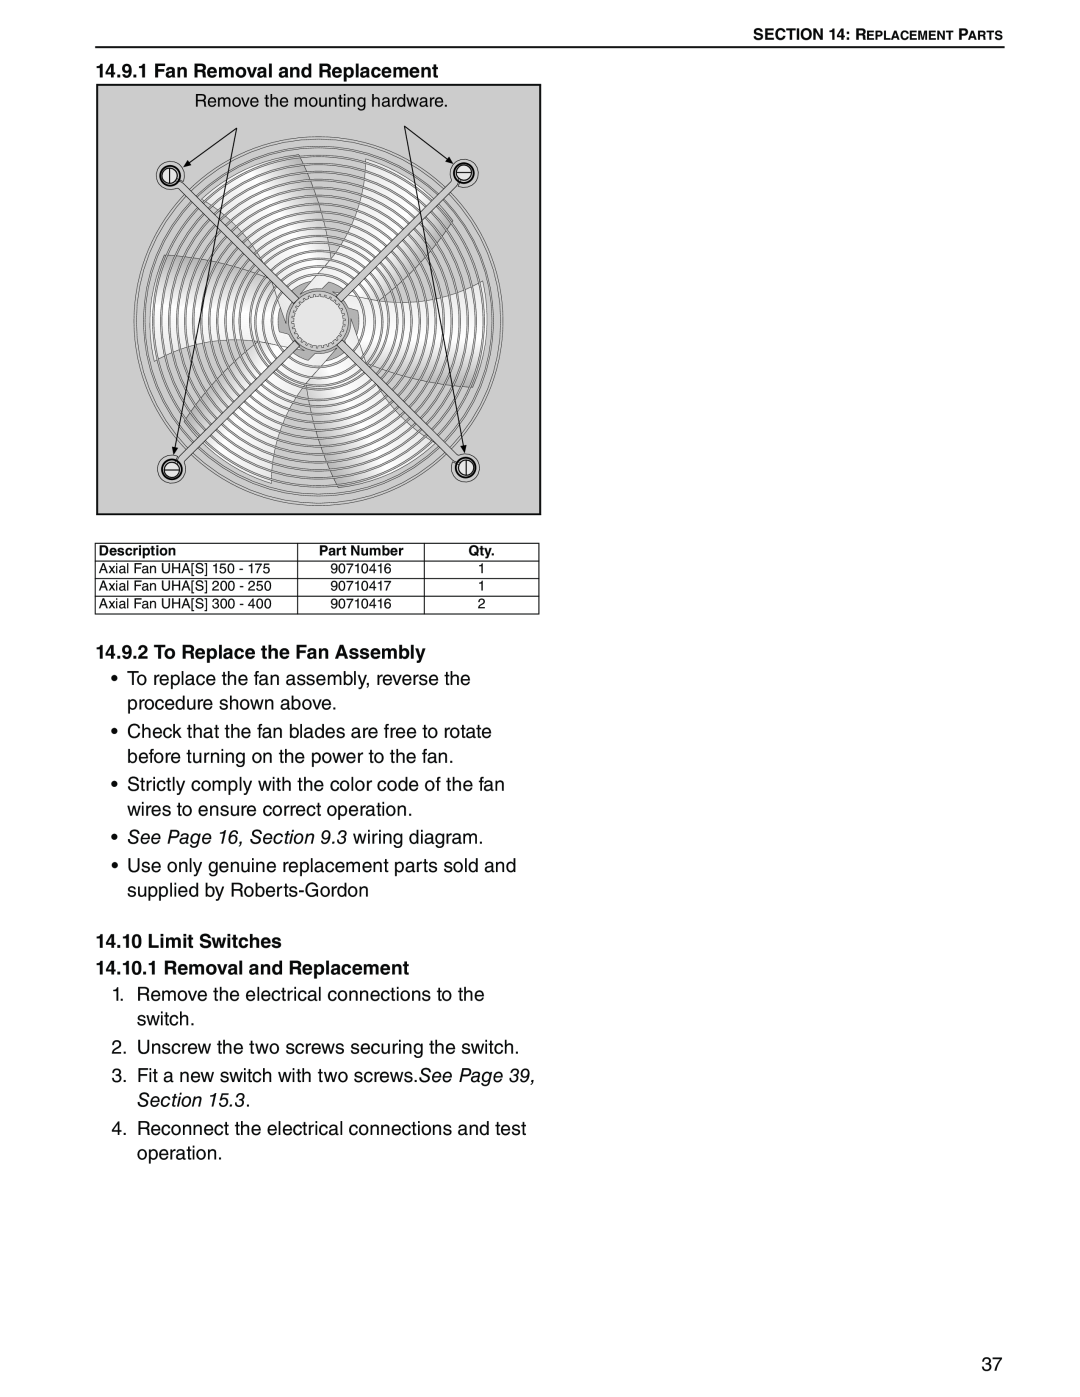 Roberts Gorden 350, 200, 150, 400 Fan Removal and Replacement, To Replace the Fan Assembly, See Page 16, .3 wiring diagram 